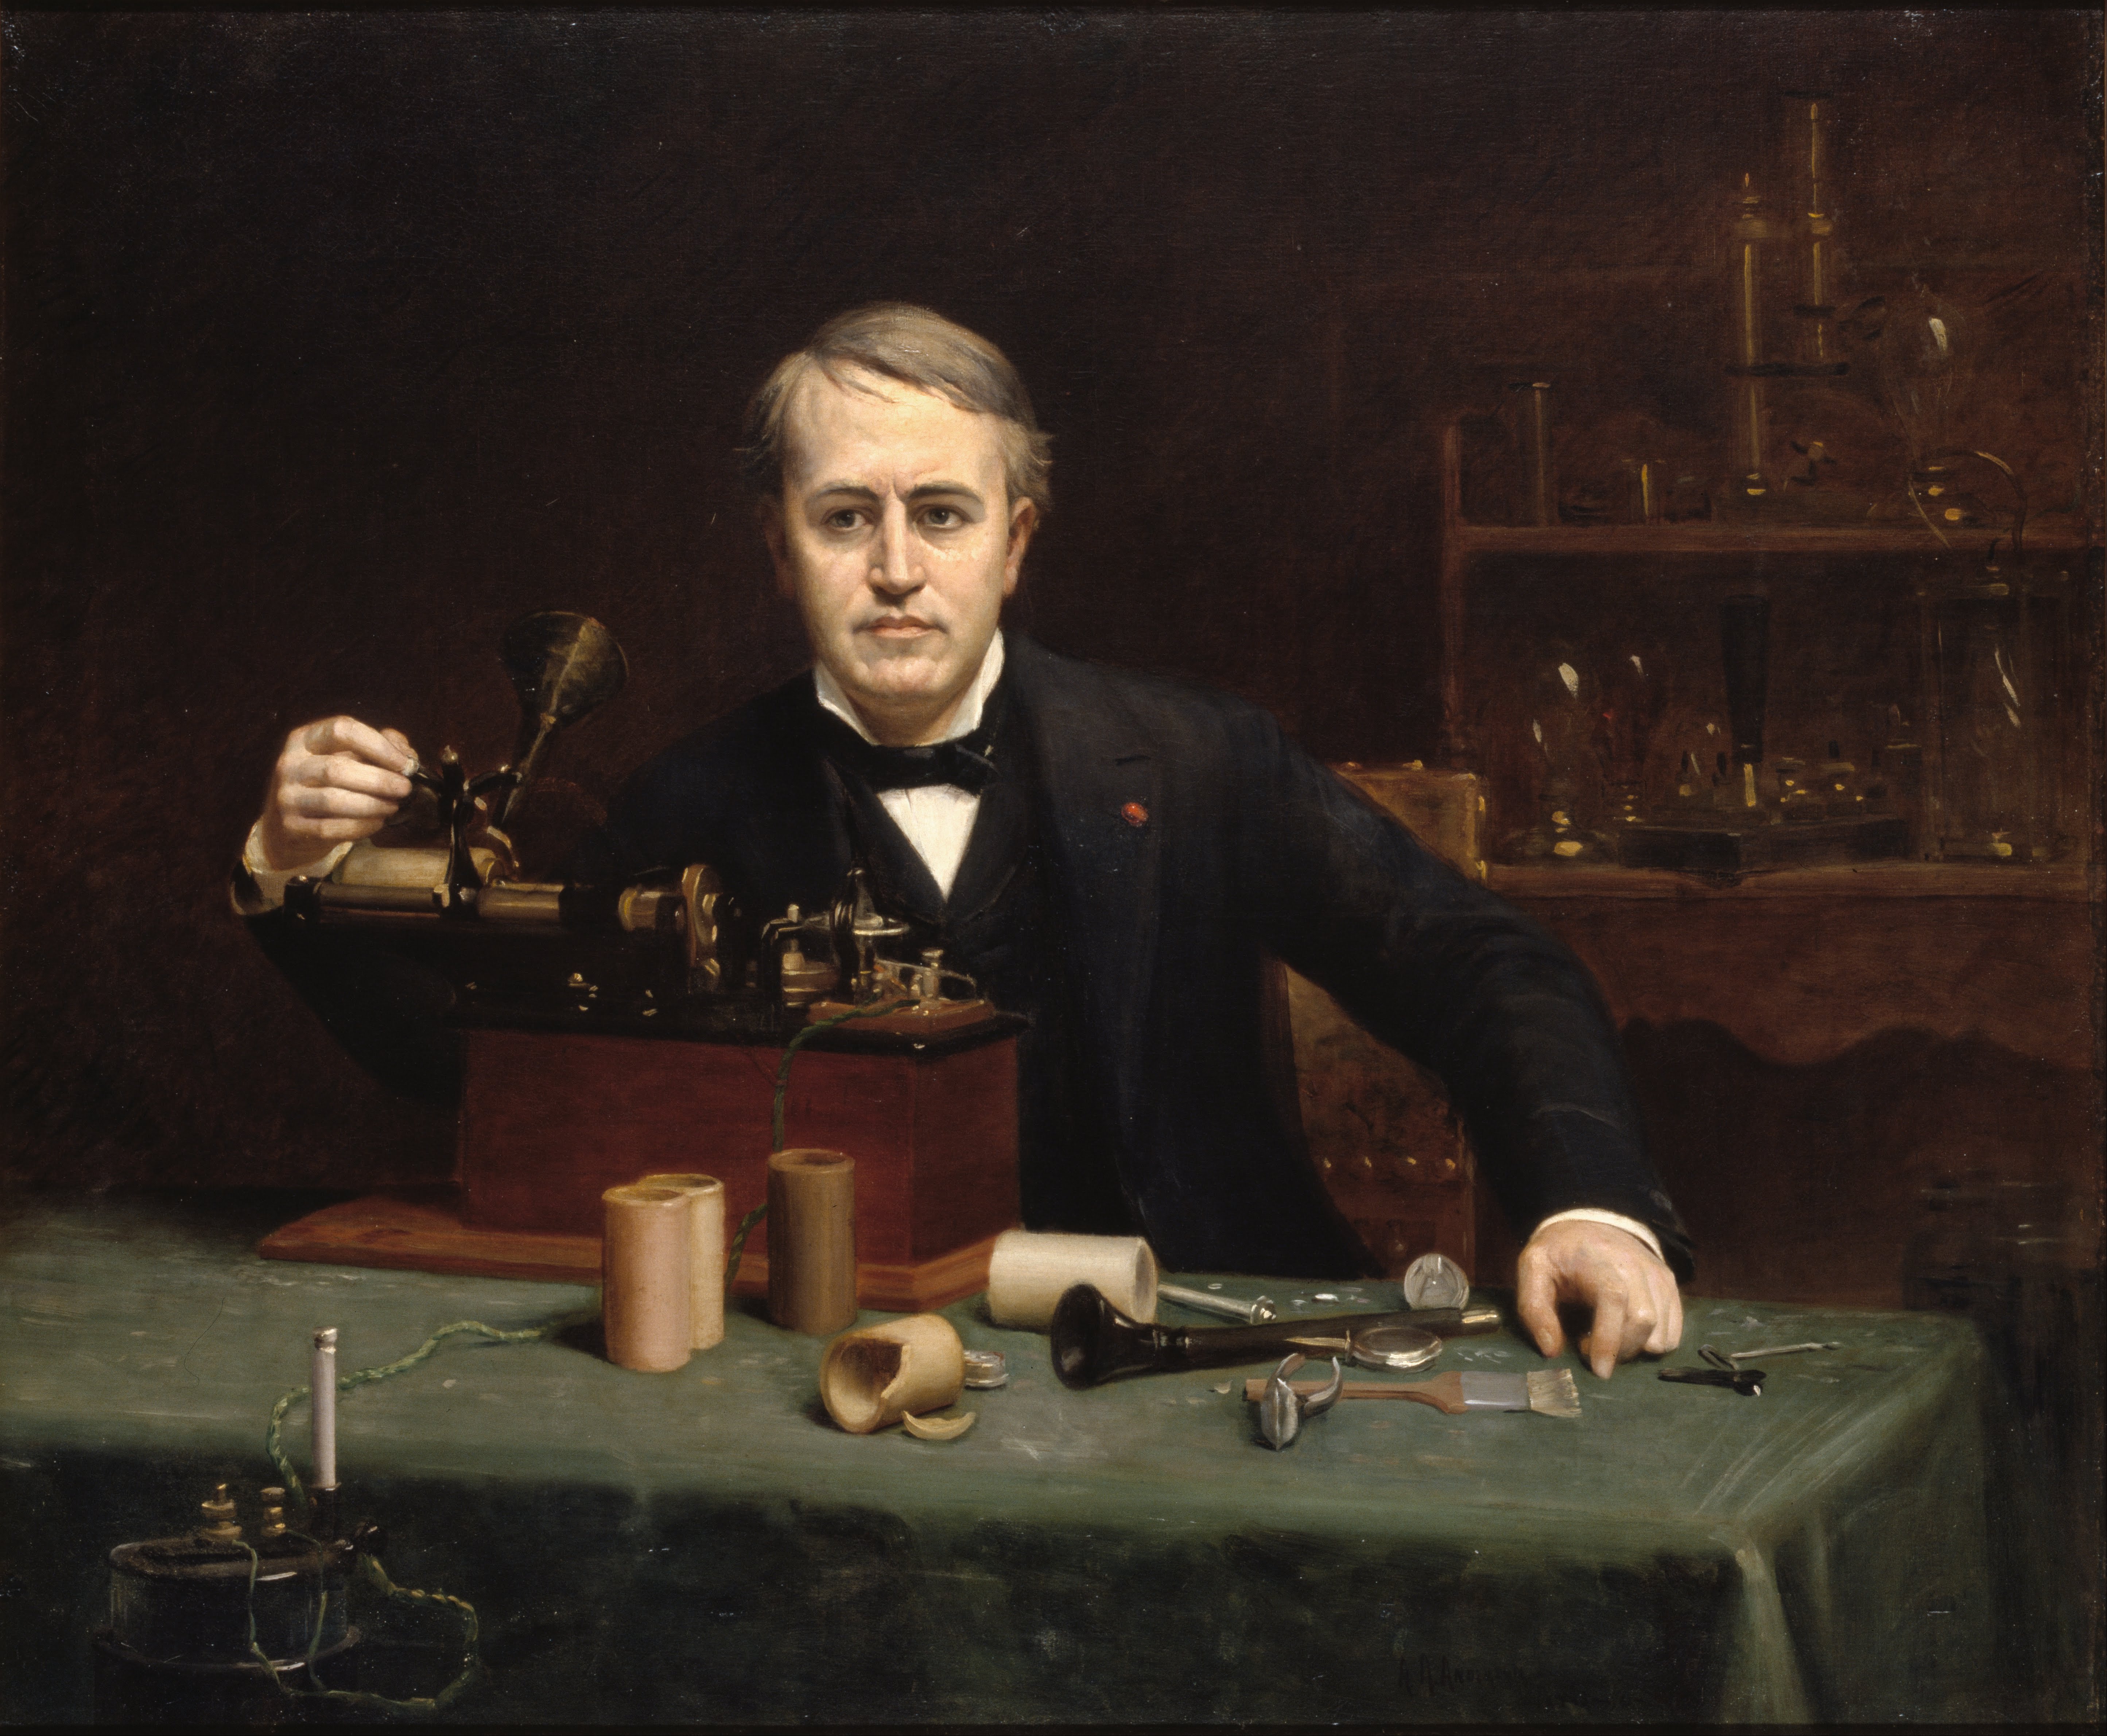 What Thomas Edison can teach us about innovation (Hint: it’s not what you think)